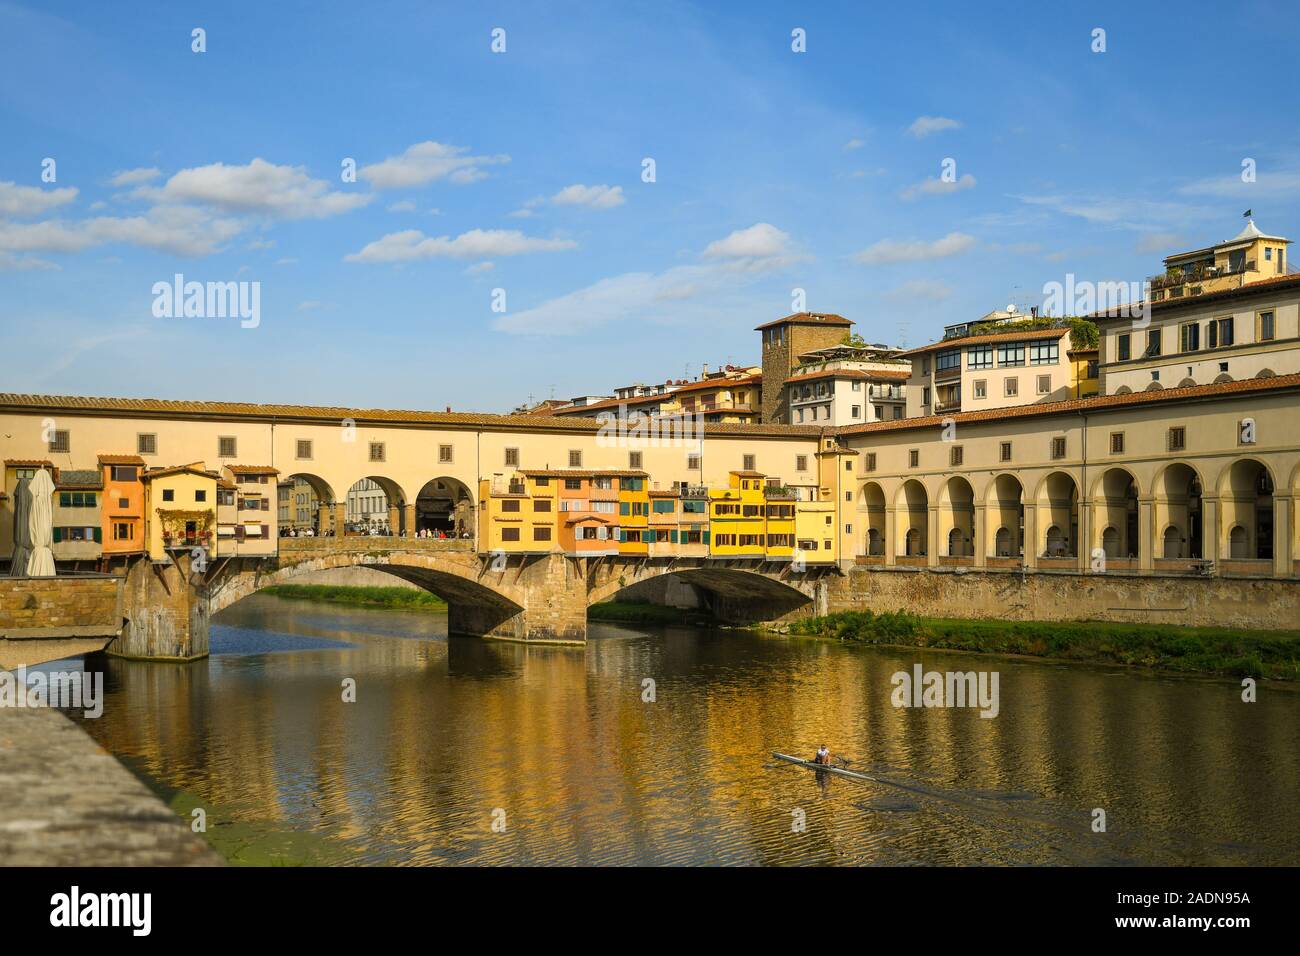 View of the famous Ponte Vecchio bridge in the historic centre of Florence, Unesco World Heritage Site, with a man rowing a canoe, Tuscany, Italy Stock Photo